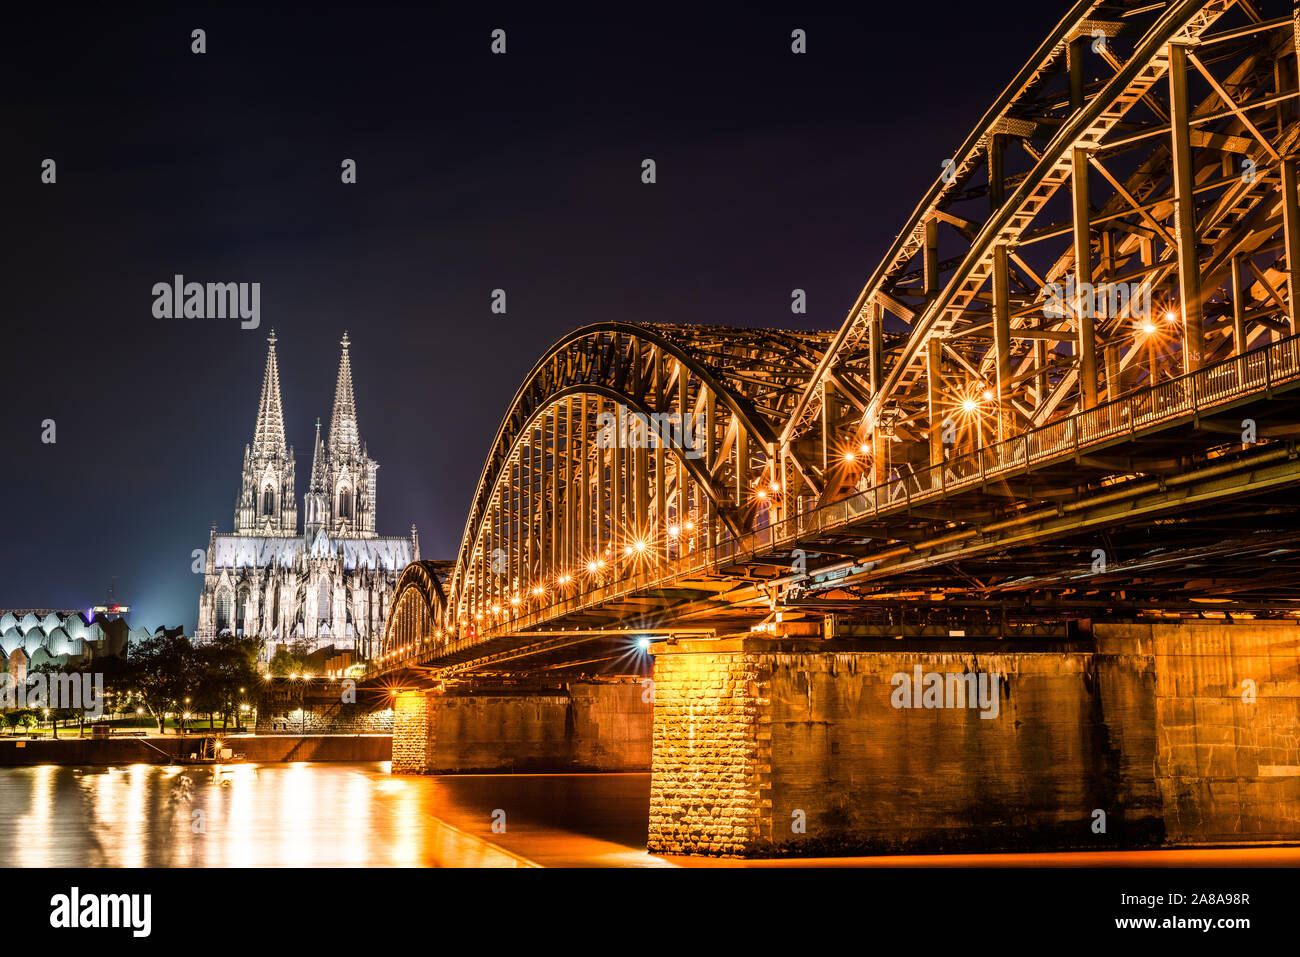 Cologne at night with Cologne Cathedral, Hohenzollern Bridge and Rhine river Stock Photo